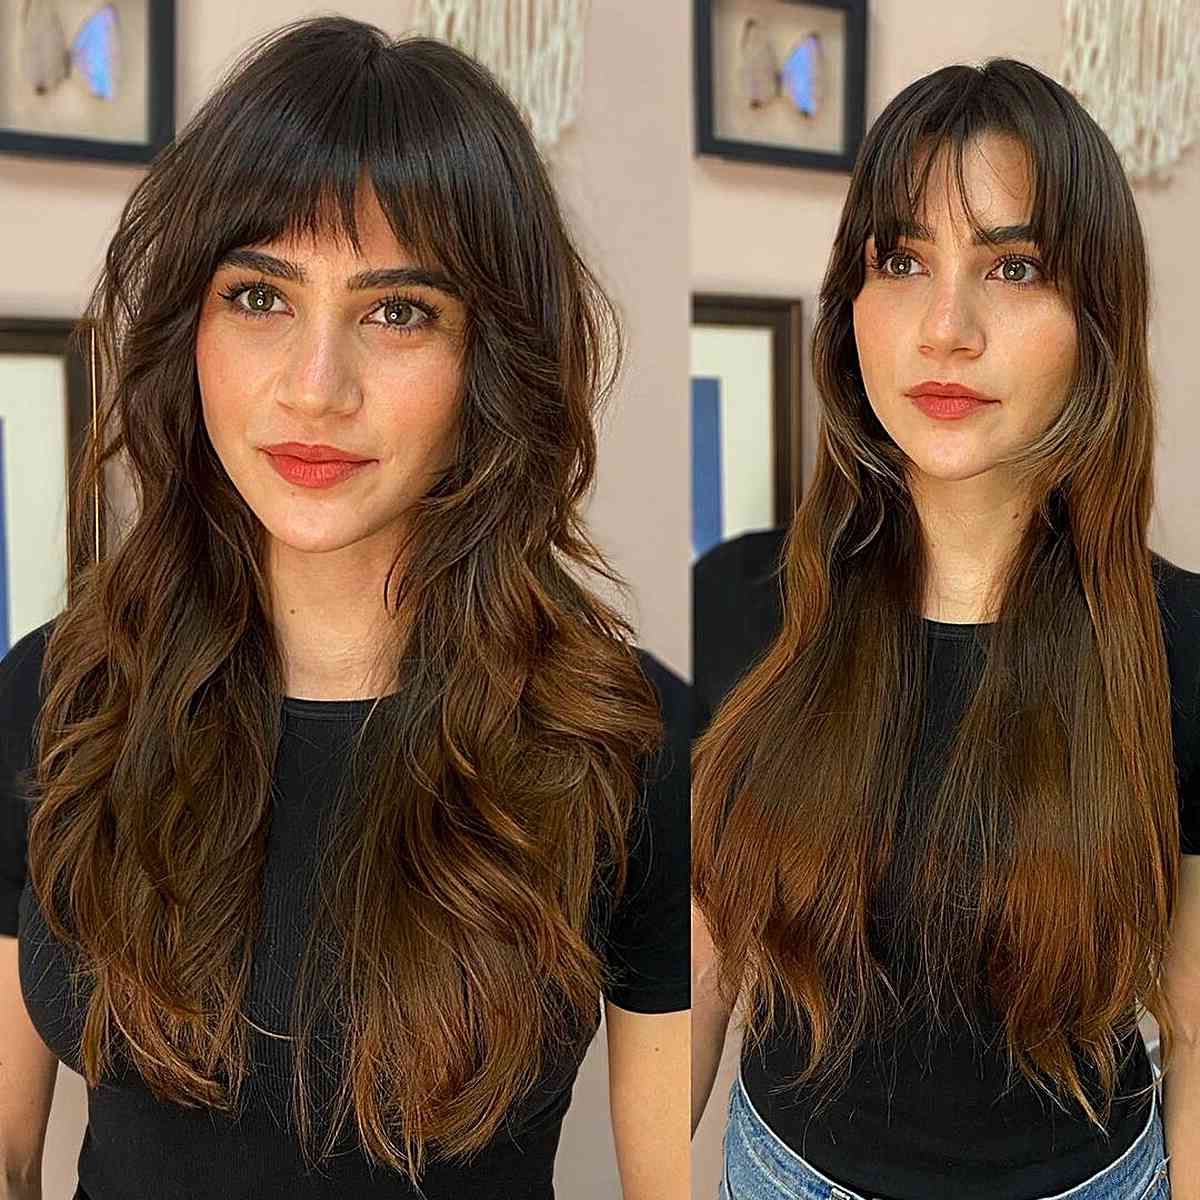 57 Coolest Long Shags With Bangs For A Trendy, New Look Intended For 2018 Long Bangs And Shaggy Lengths (View 4 of 18)